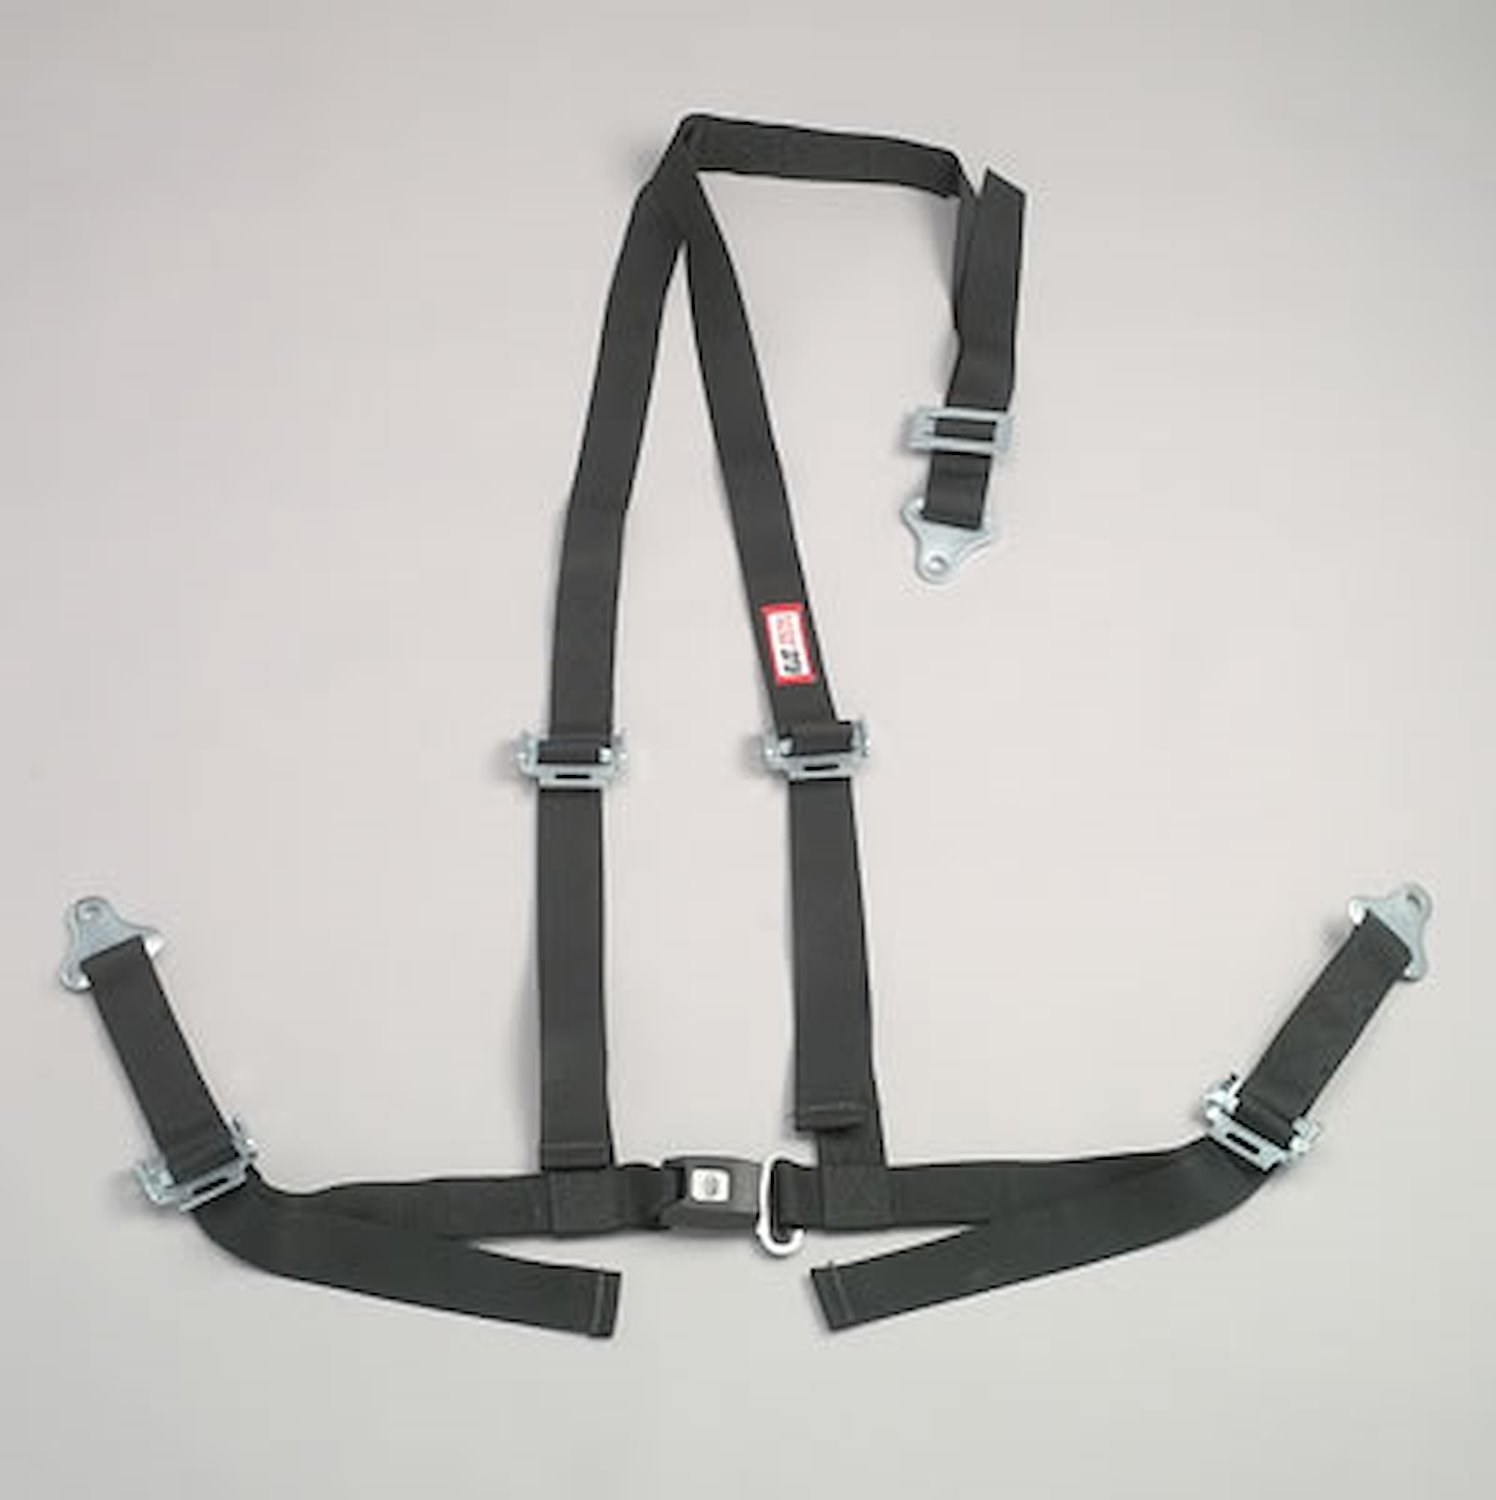 NON-SFI B&T HARNESS 2 PULL UP Lap Belt 2 S. H. Individual FLOOR Mount ALL WRAP ENDS w/STERNUM STRAP GRAY